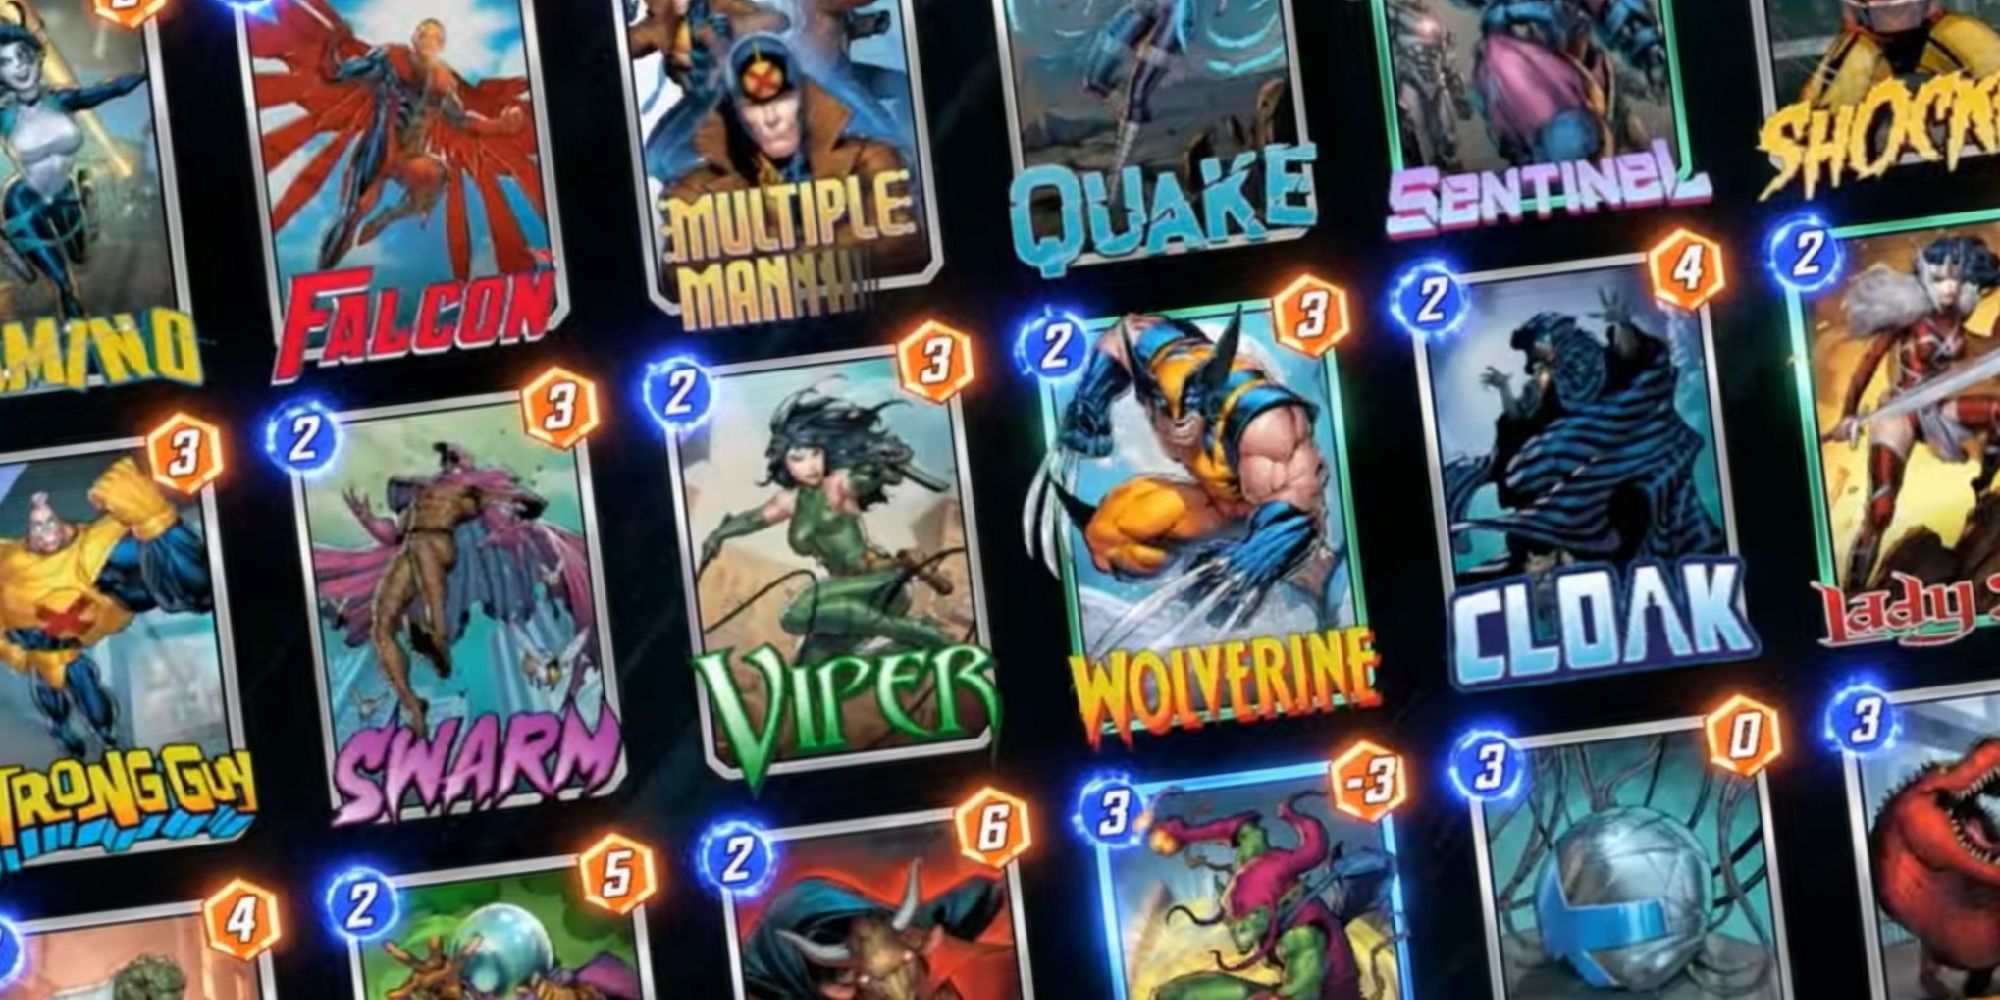 A selection of famous Marvel character cards from the Marvel Snap game